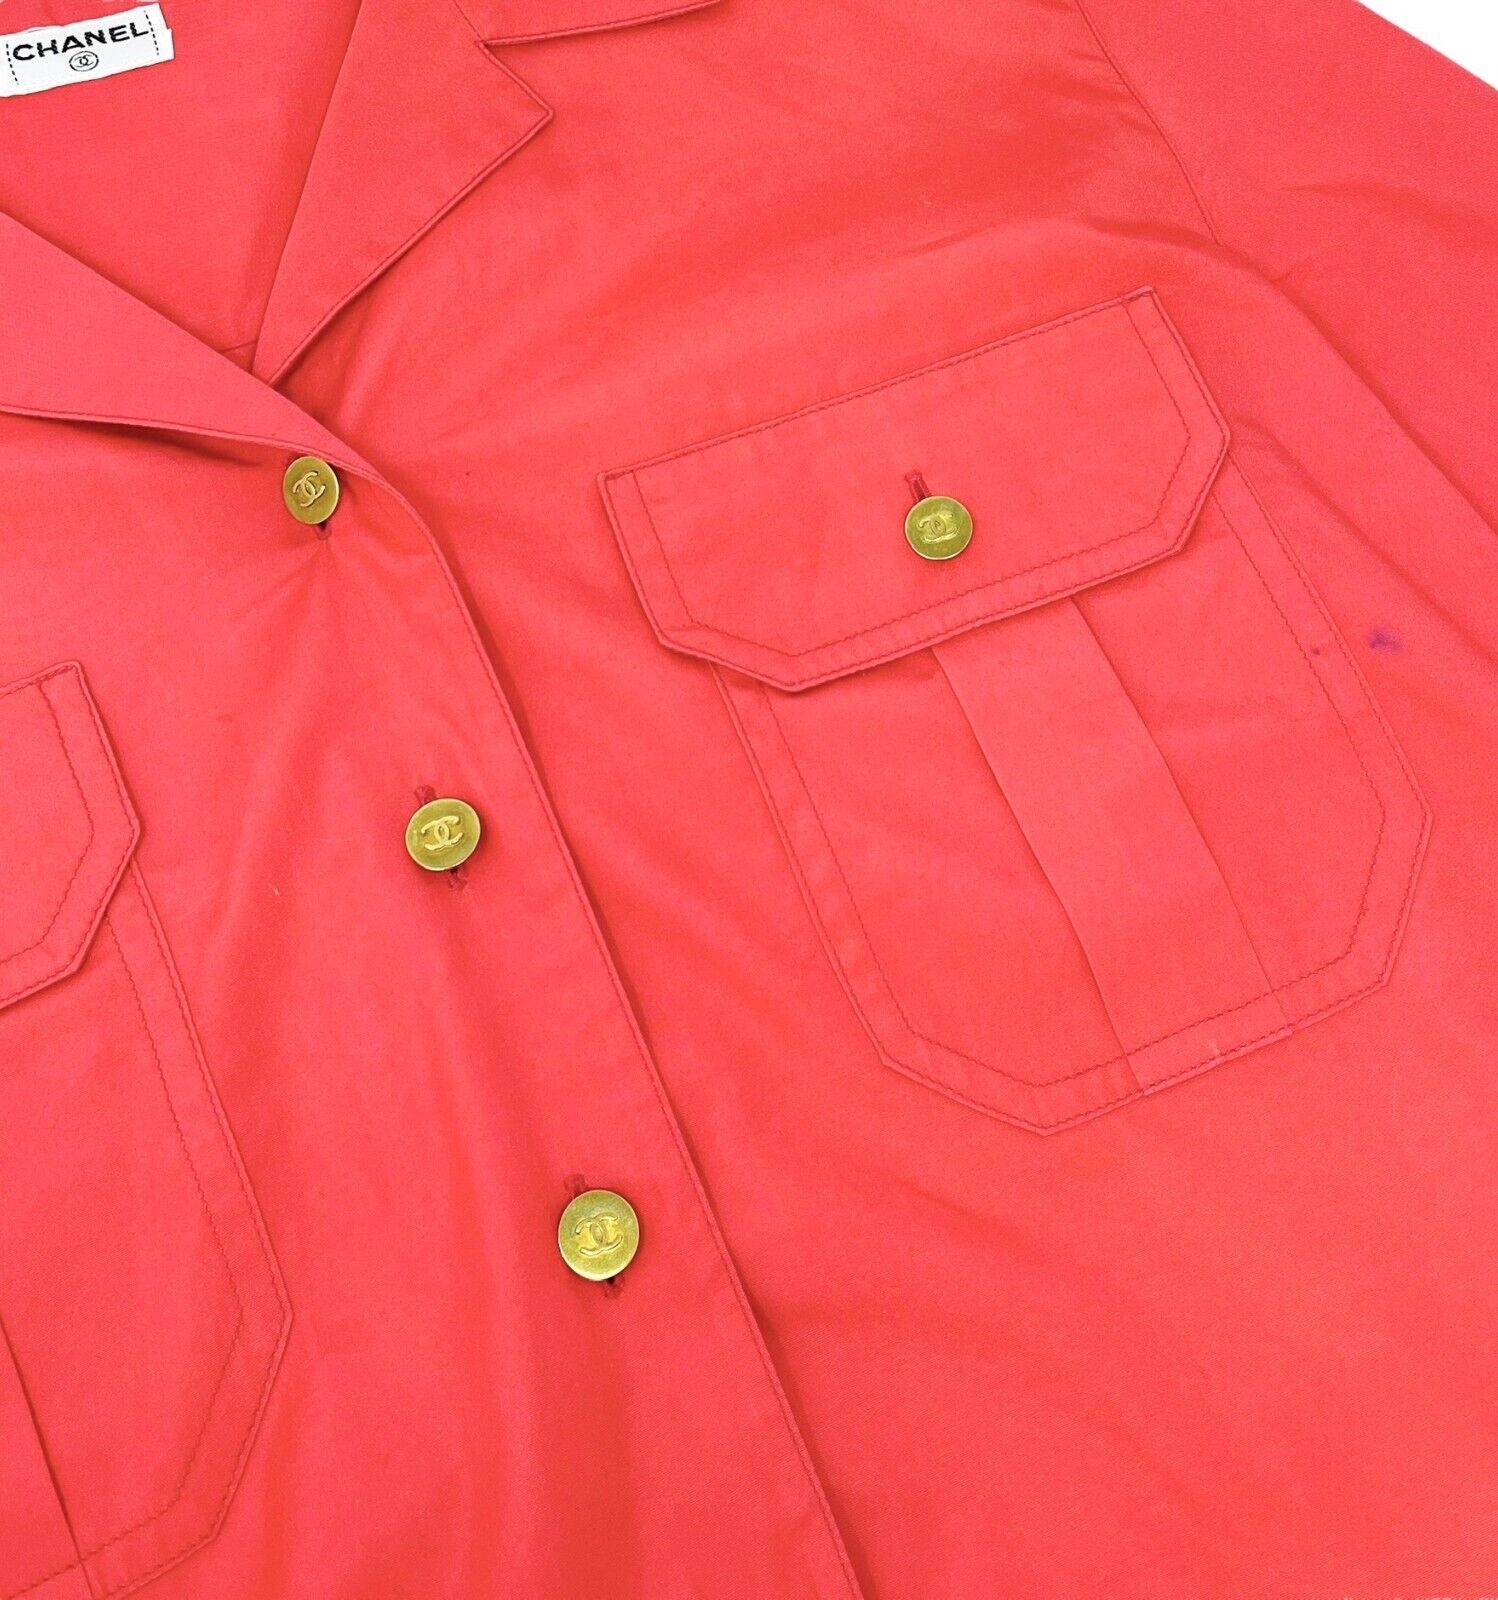 CHANEL Vintage CC Mark Gold Button Shirt Top Pocket Red Cotton Rank AB